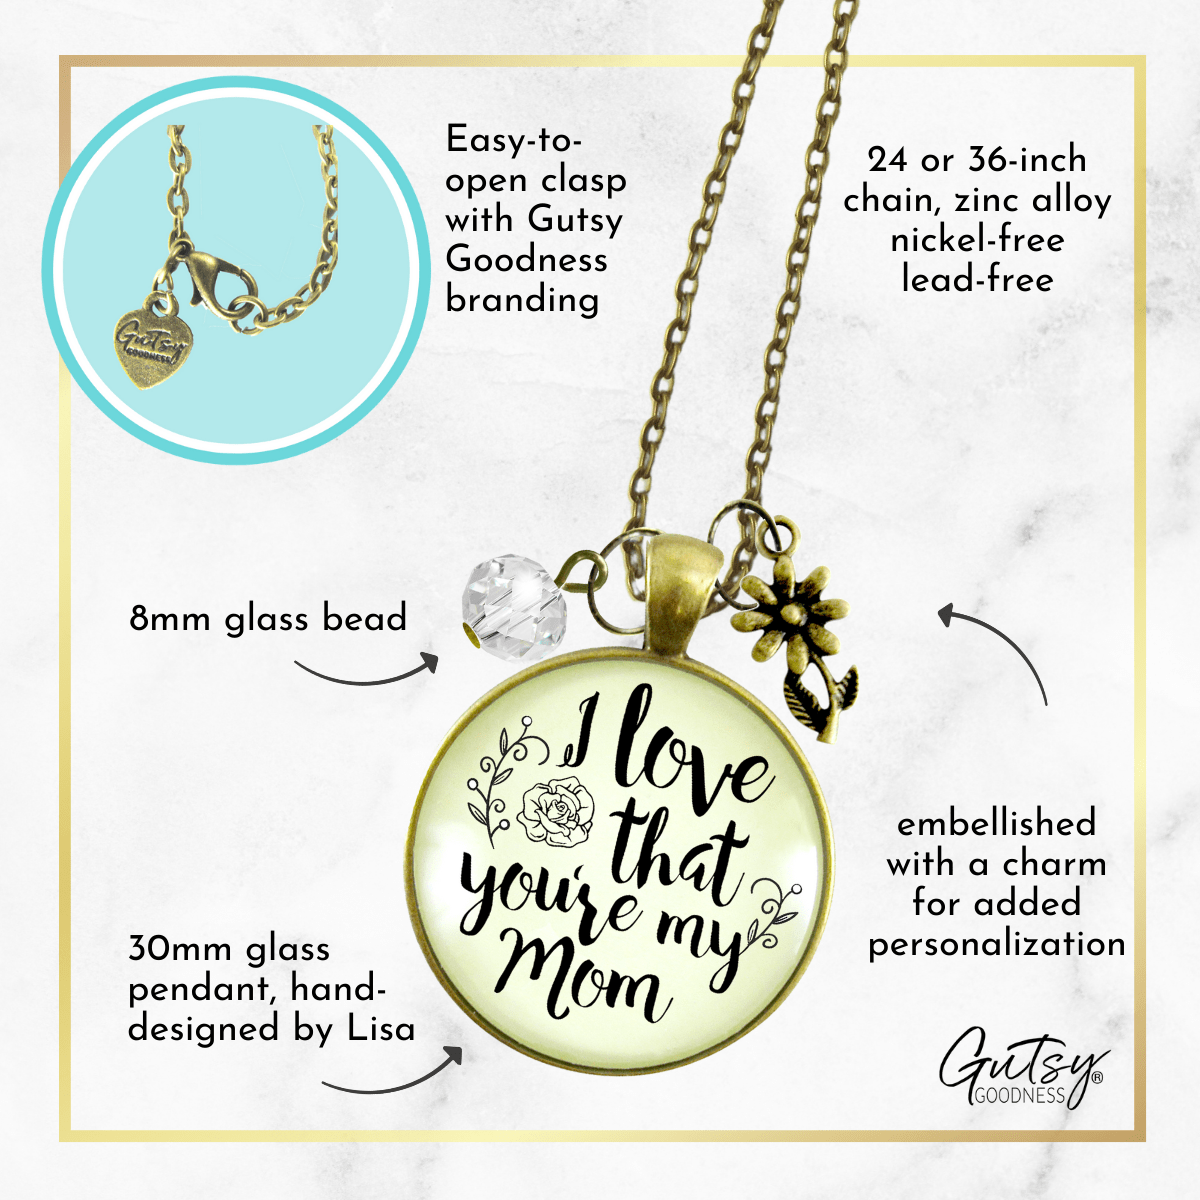 Gutsy Goodness My Mom Necklace I Love You Meaningful Quote Gift from Daughter - Gutsy Goodness;My Mom Necklace I Love You Meaningful Quote Gift From Daughter - Gutsy Goodness Handmade Jewelry Gifts